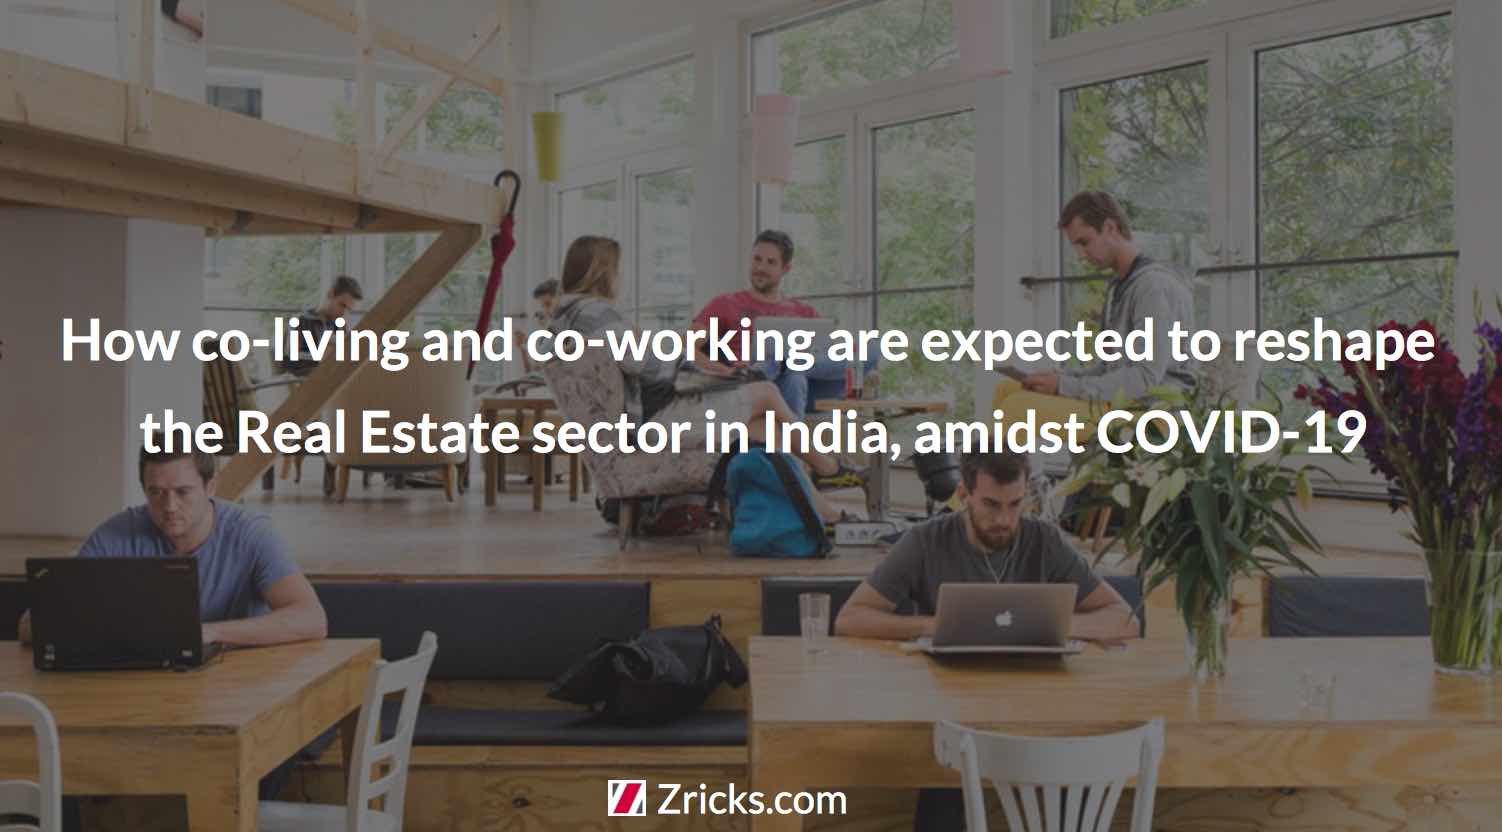 How co-living and co-working are expected to reshape the Real Estate sector in India, amidst COVID-19 Update